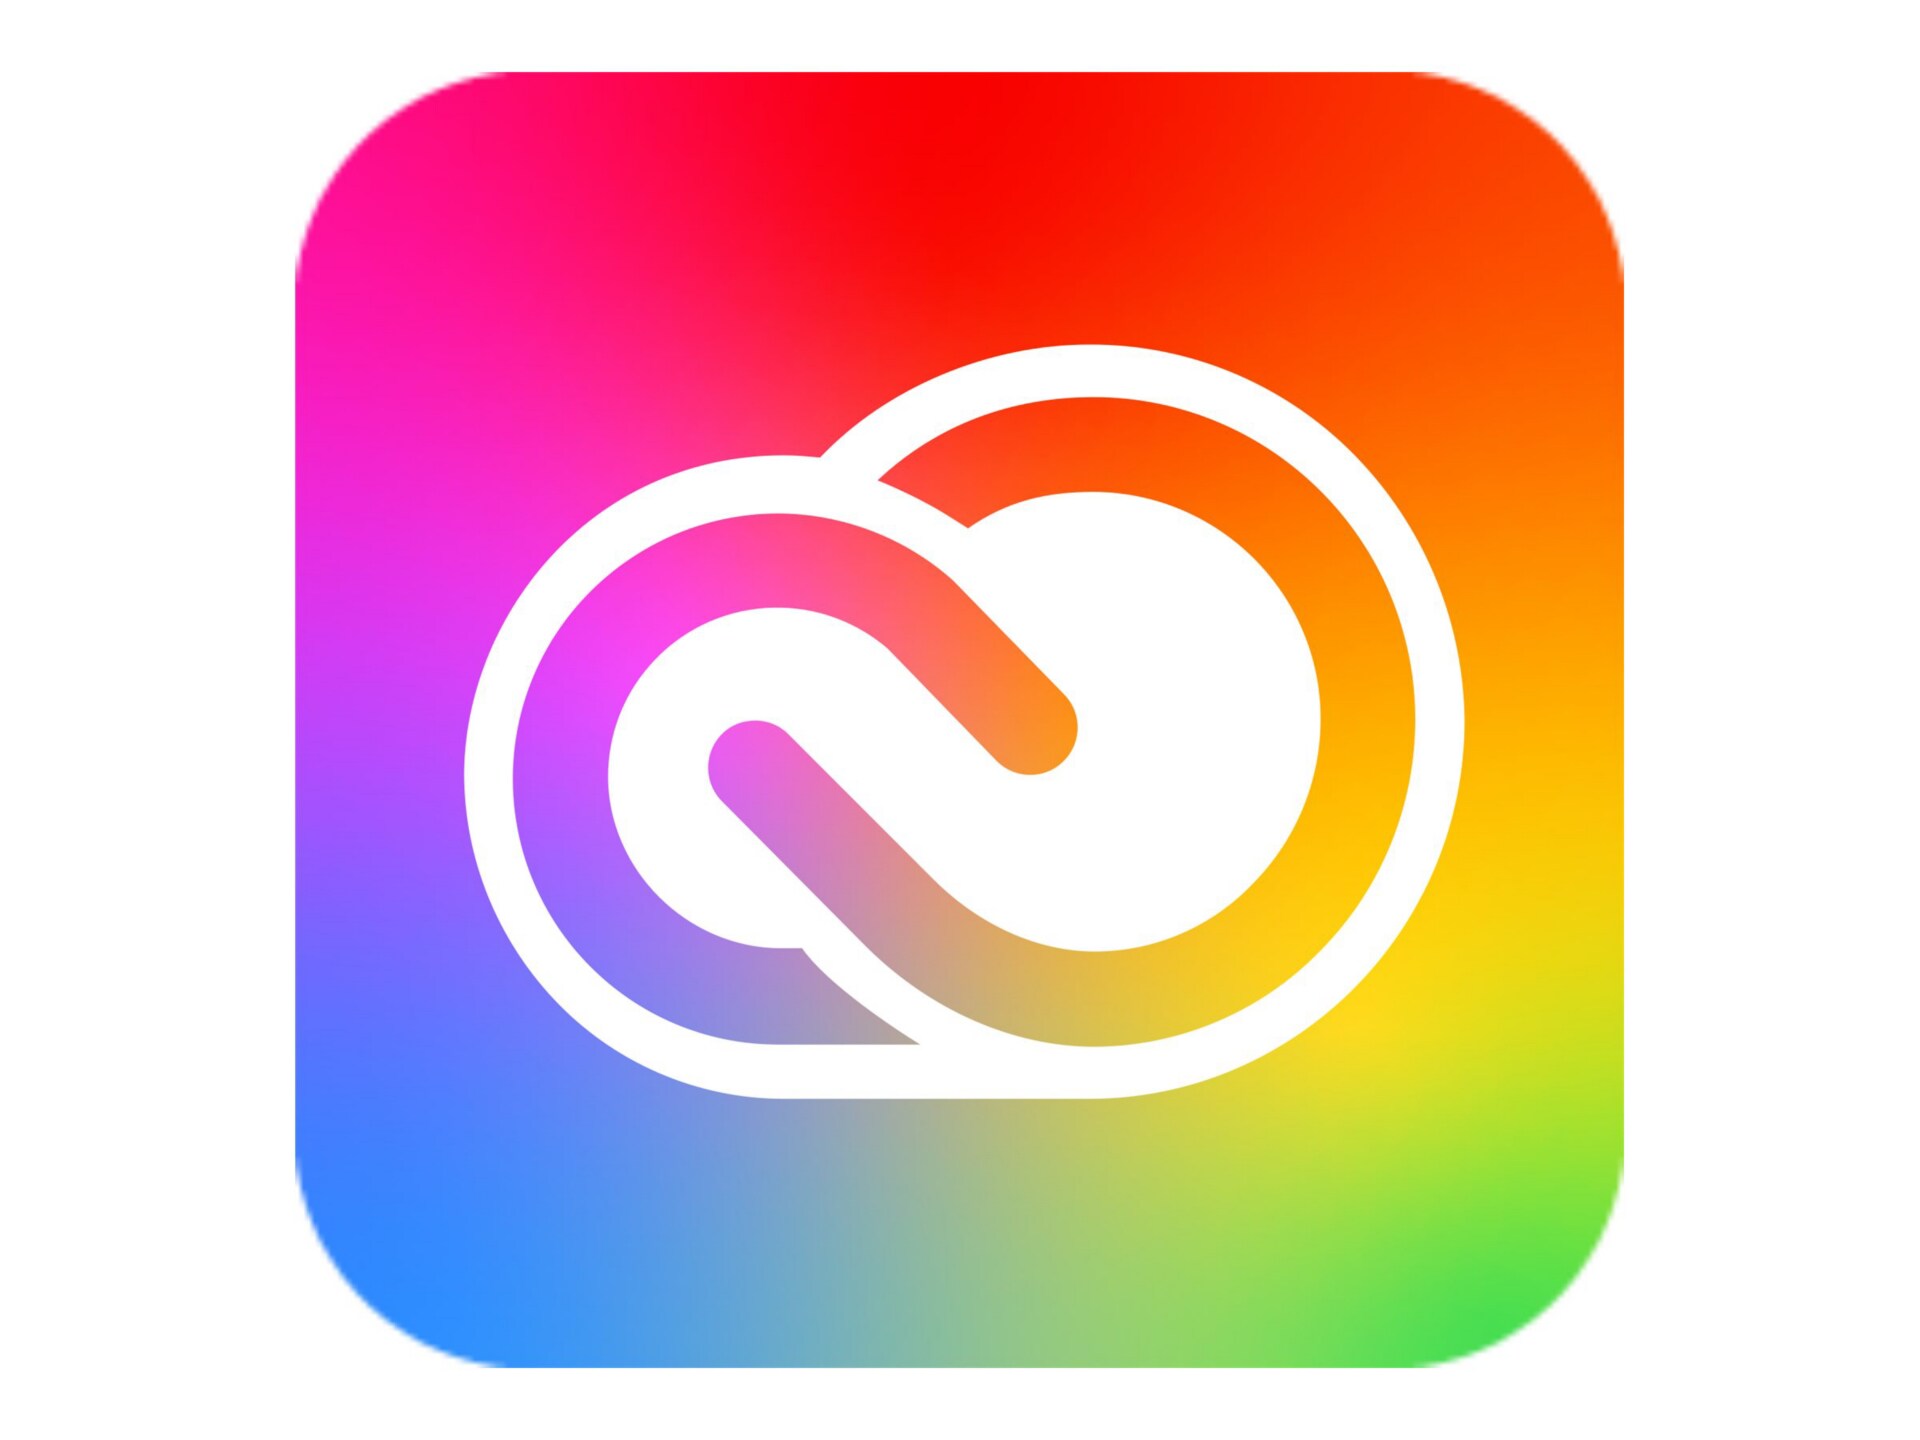 Adobe Creative Cloud for Enterprise - All Apps - Subscription New (8 months) - 1 named user